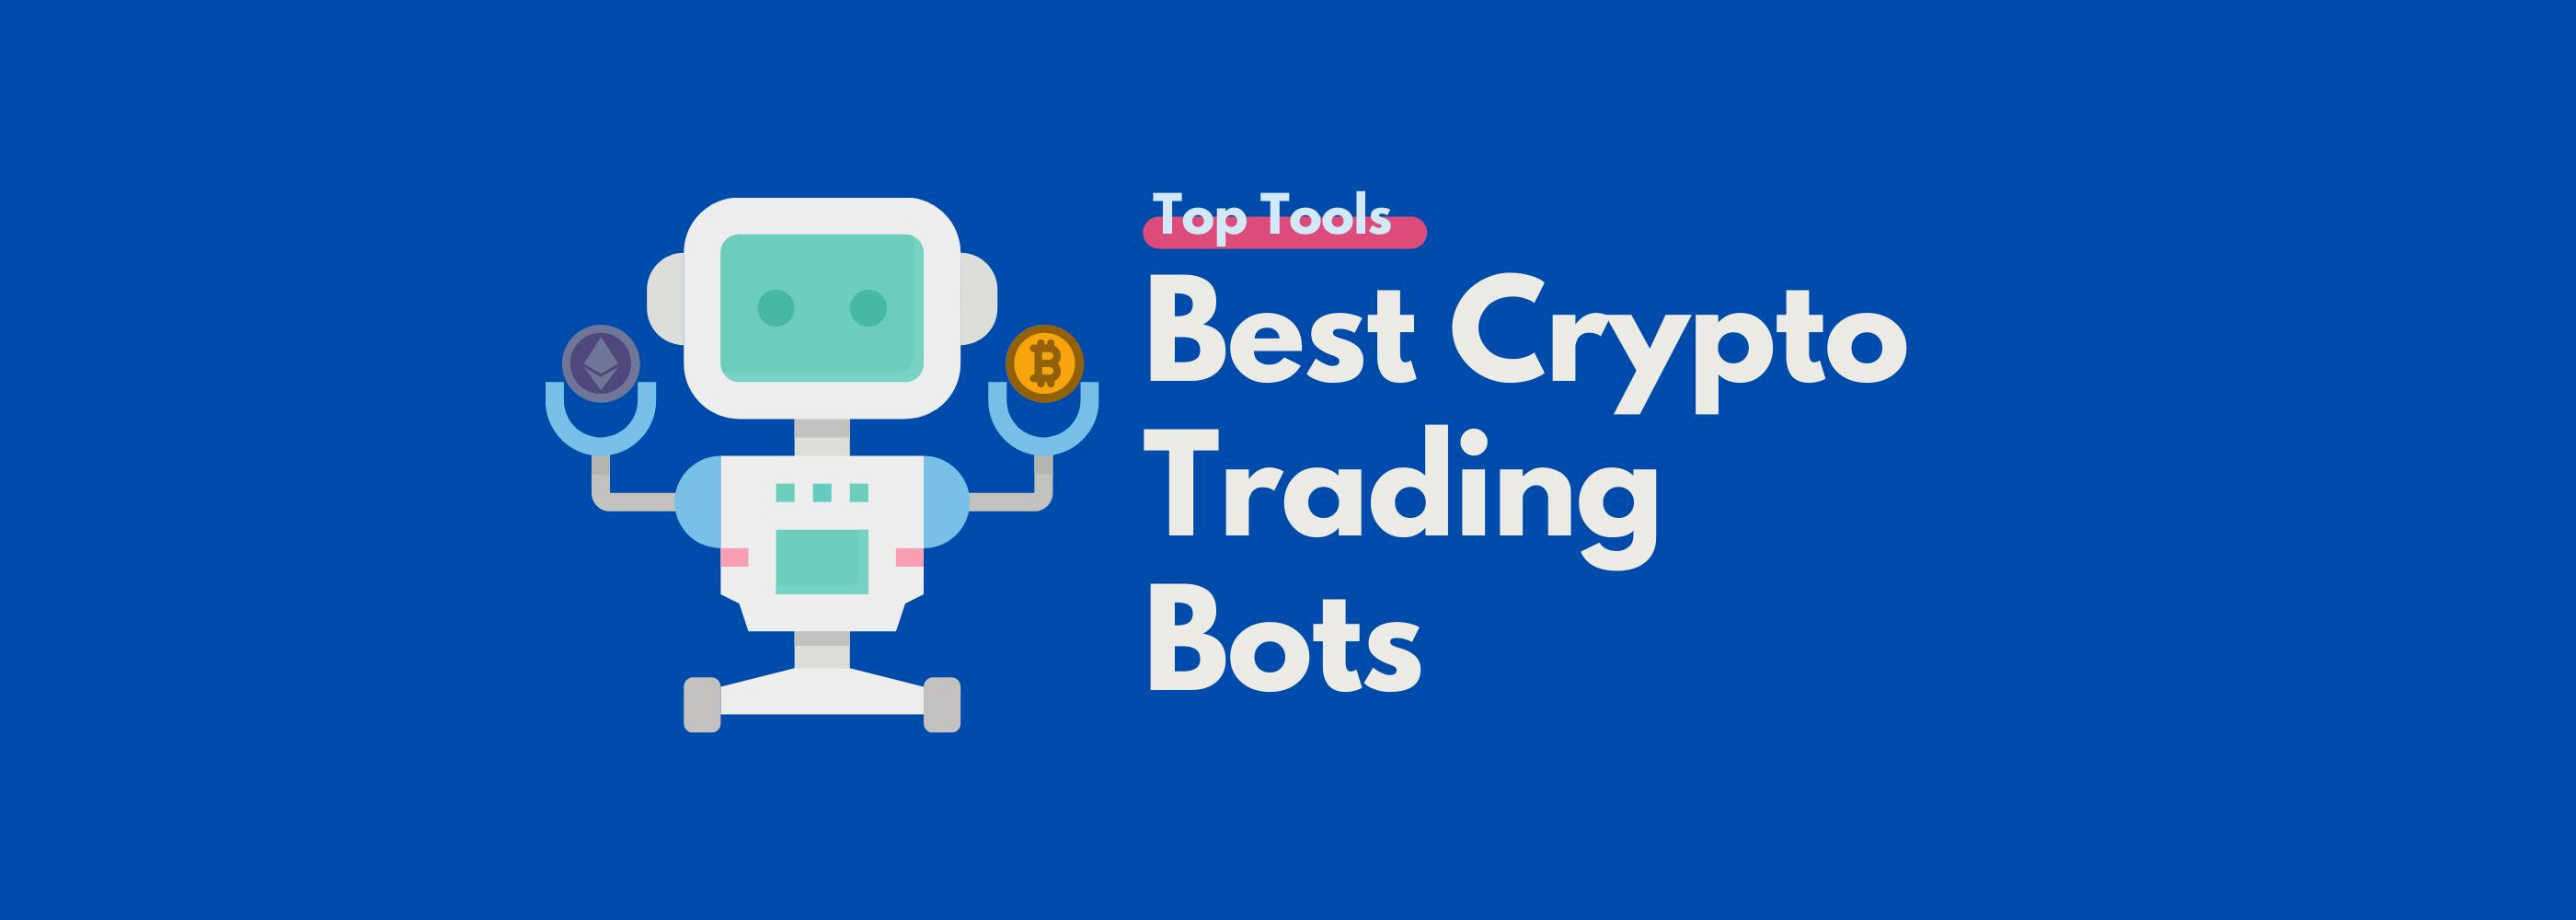 10 BEST Crypto Trading Bots (Free & Paid) in May 2022